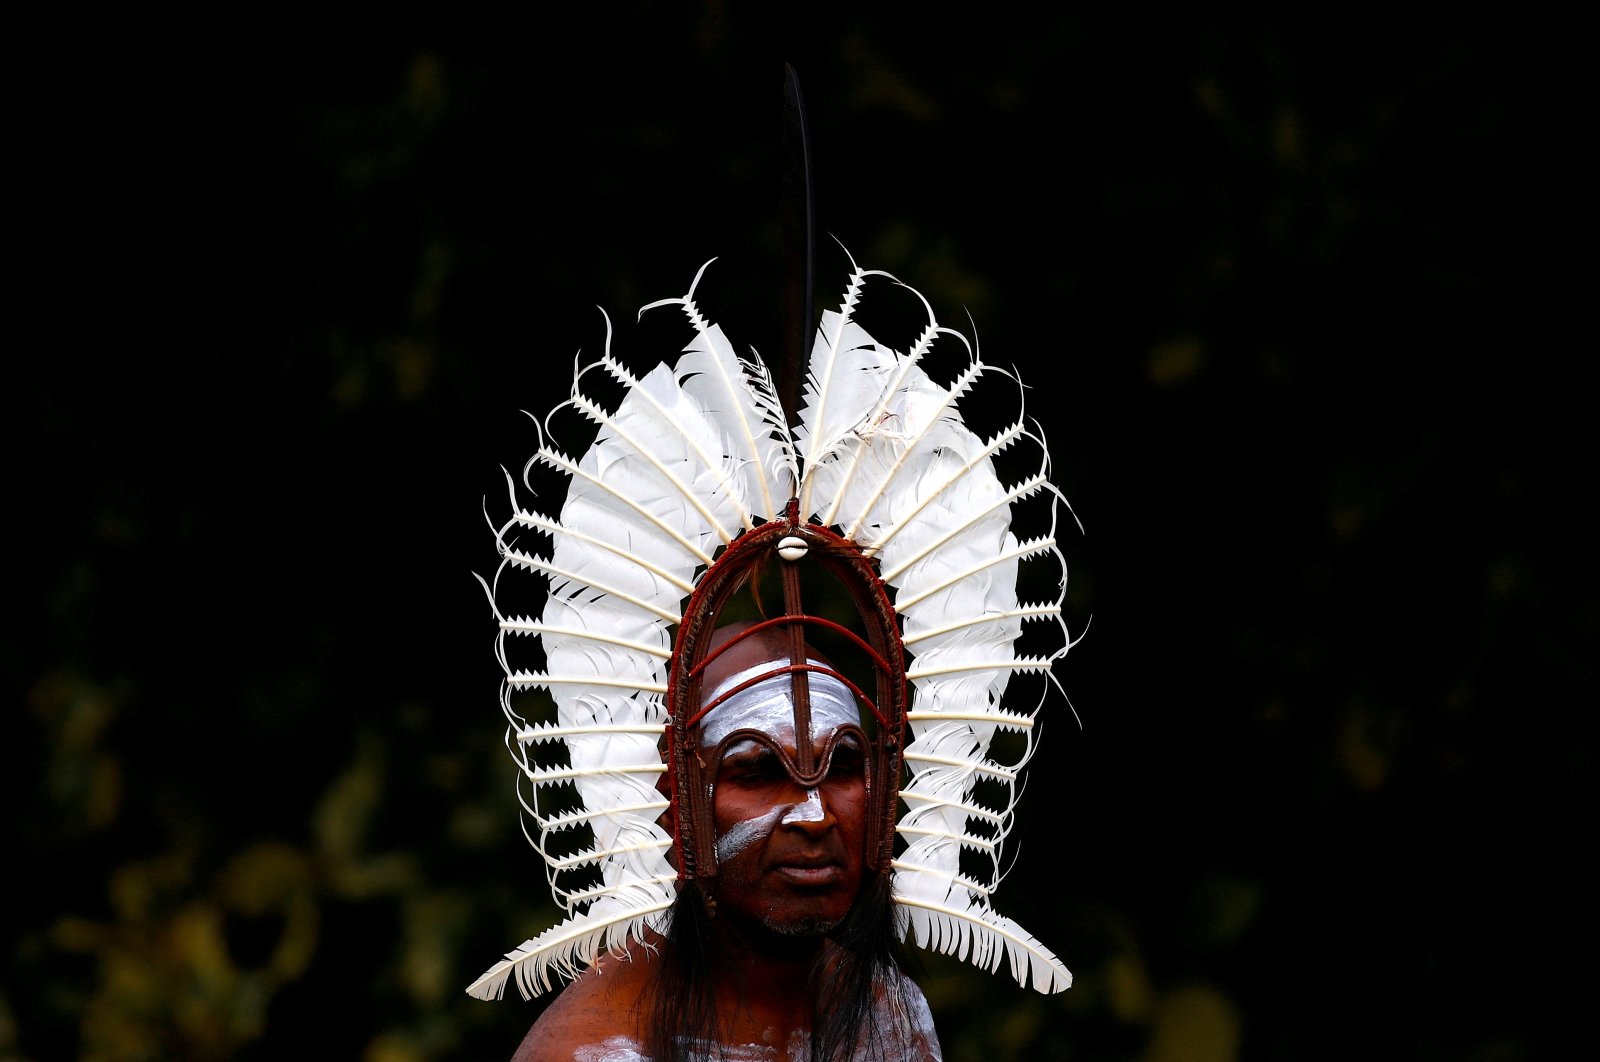 An indigenous man from the Torres Strait Islands wears a traditional dress as he performs during a welcoming ceremony at Government House in Sydney, Australia, June 28, 2017. (Reuters Photo)